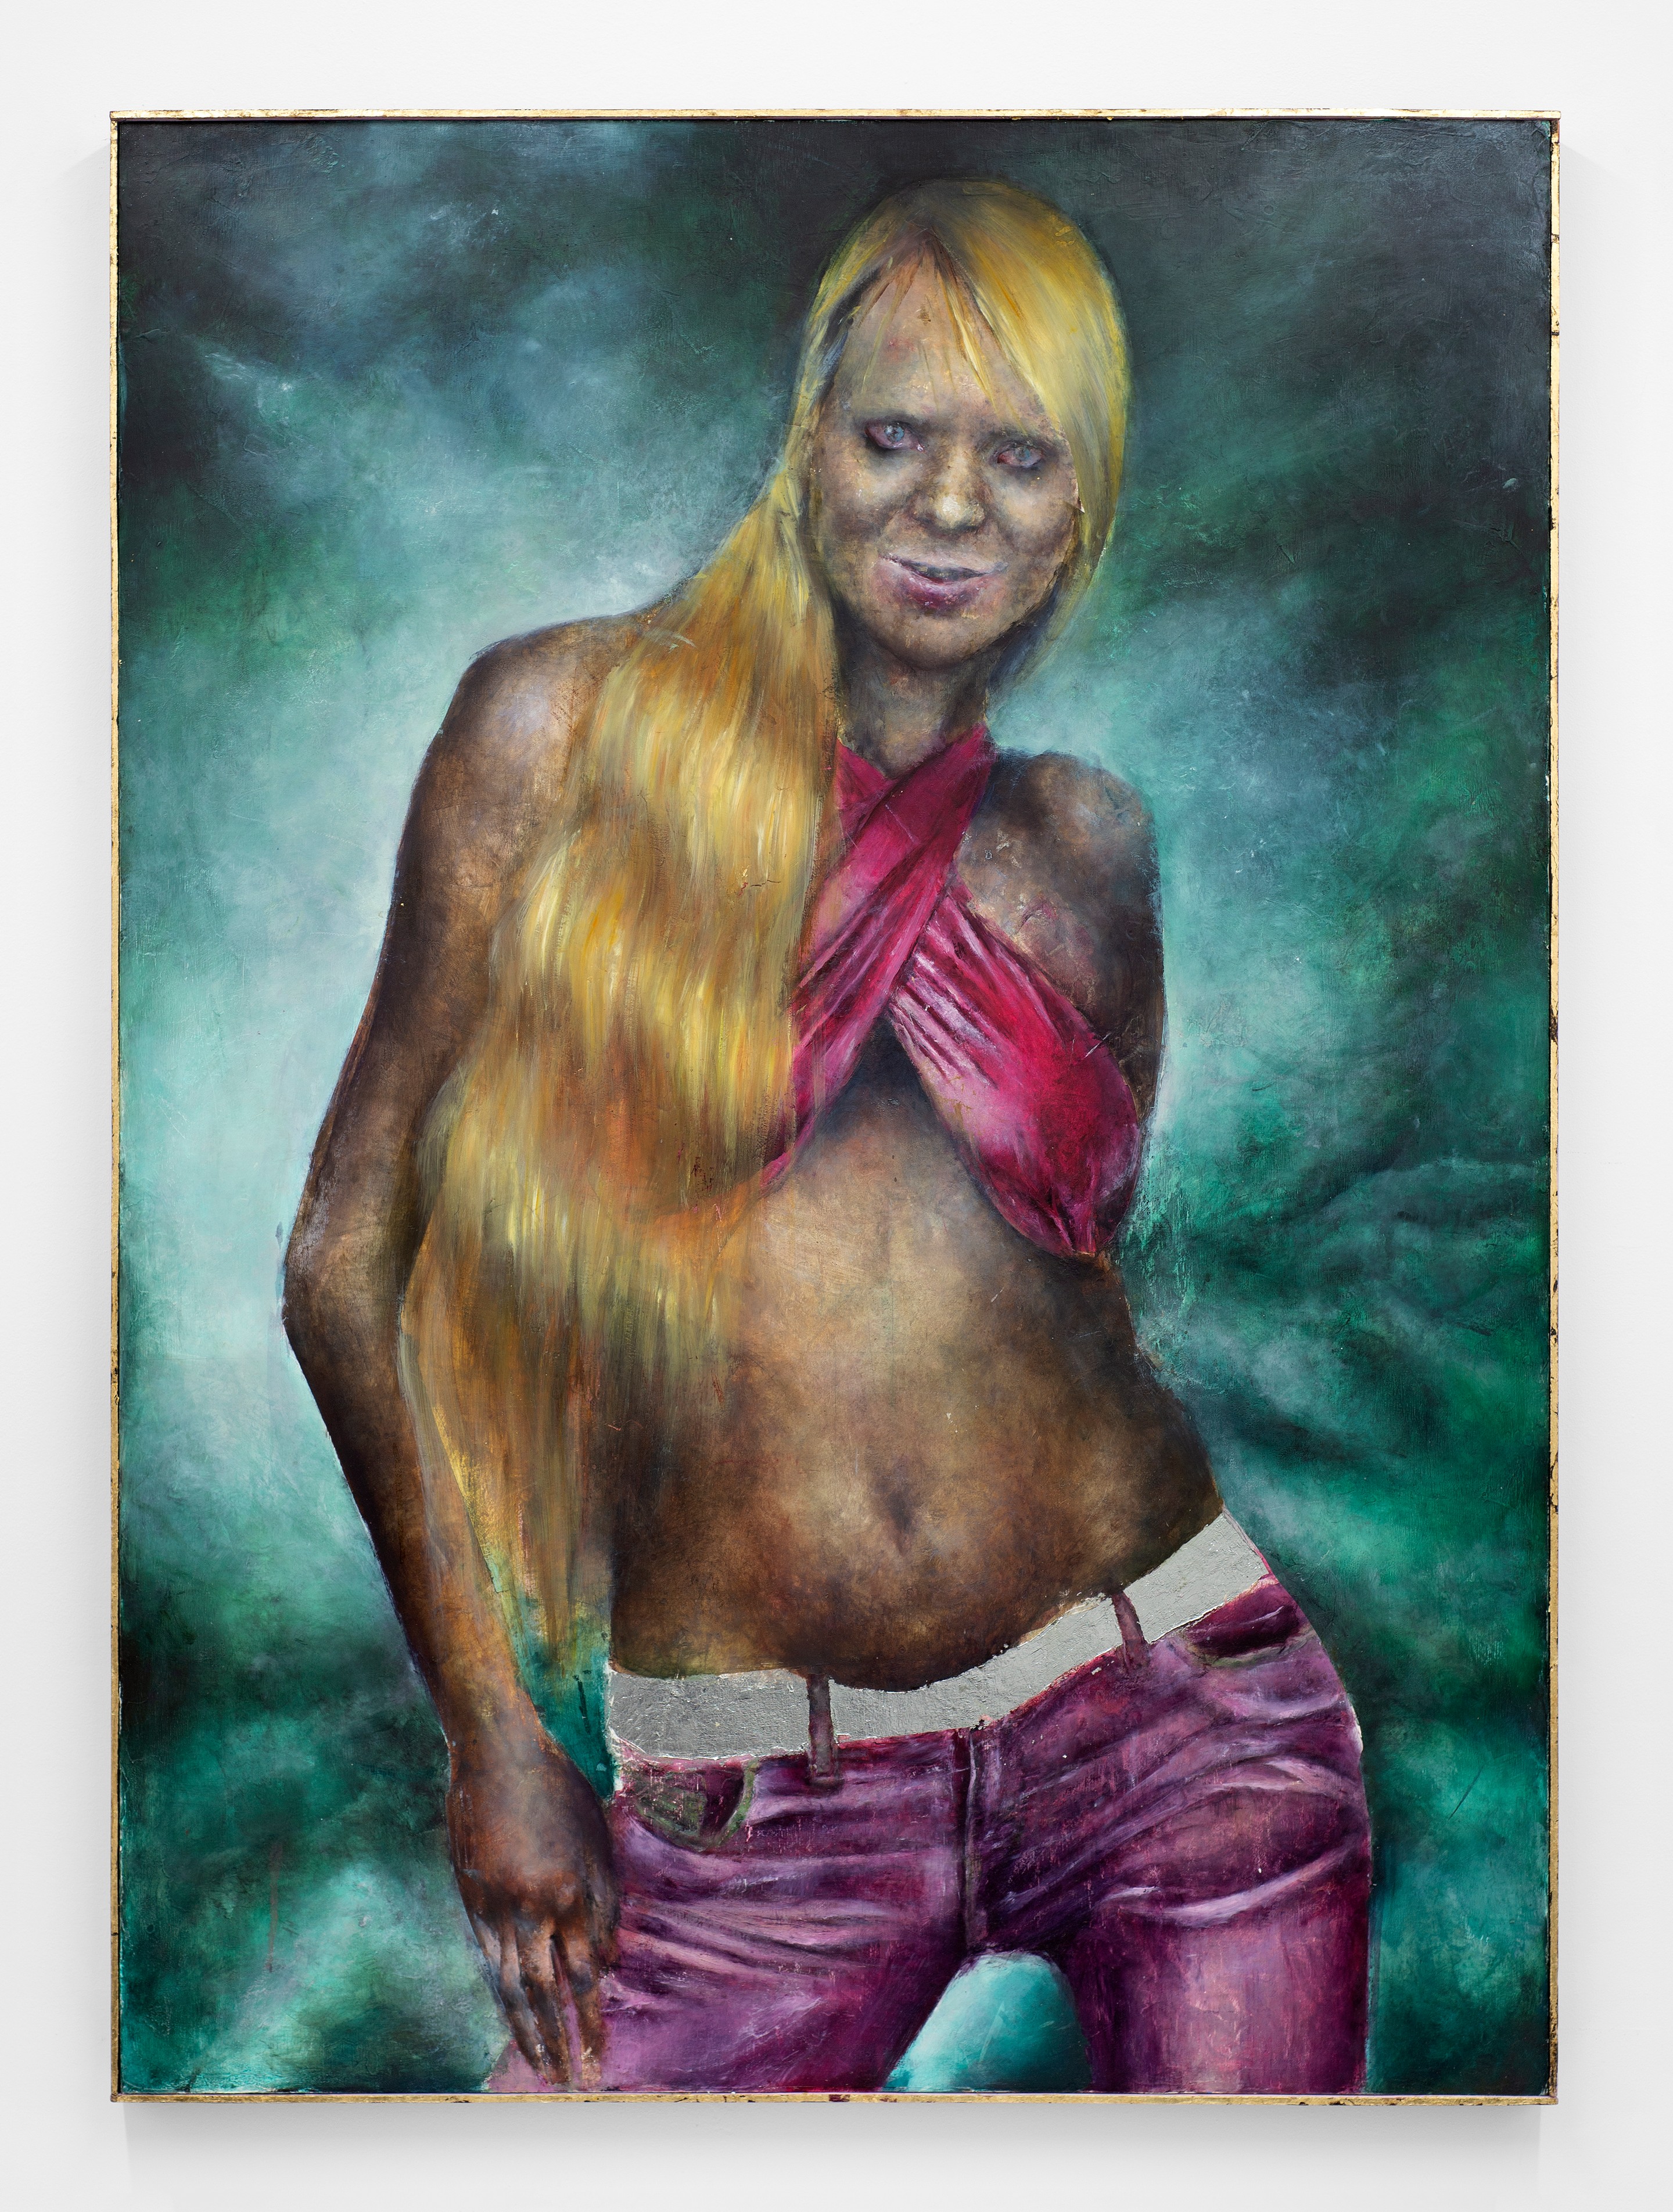 Stacey (2022)
Oil and gold leaf on panel with artist's frame
55.5h x 40.5w x 2d inches (140.97h x 102.87w x 5.08d cm)